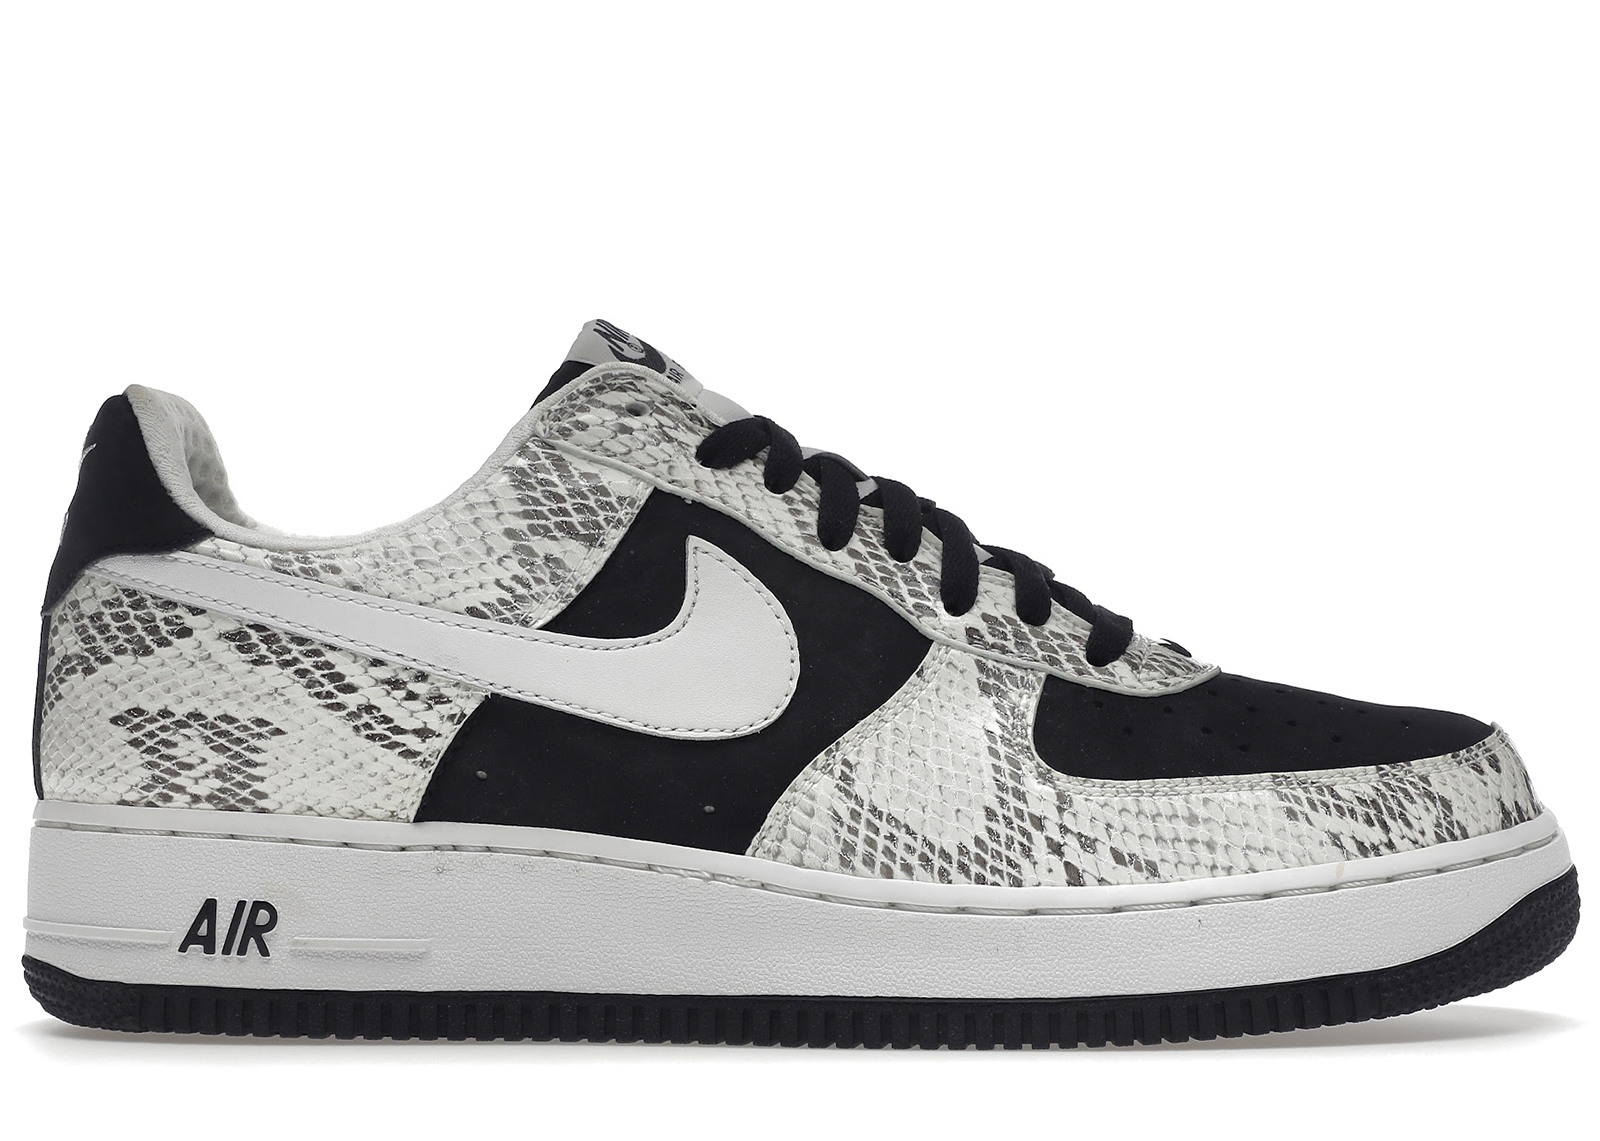 Nike Air Force 1 Low Snakeskin Cocoa Men's - 312945-011 - US